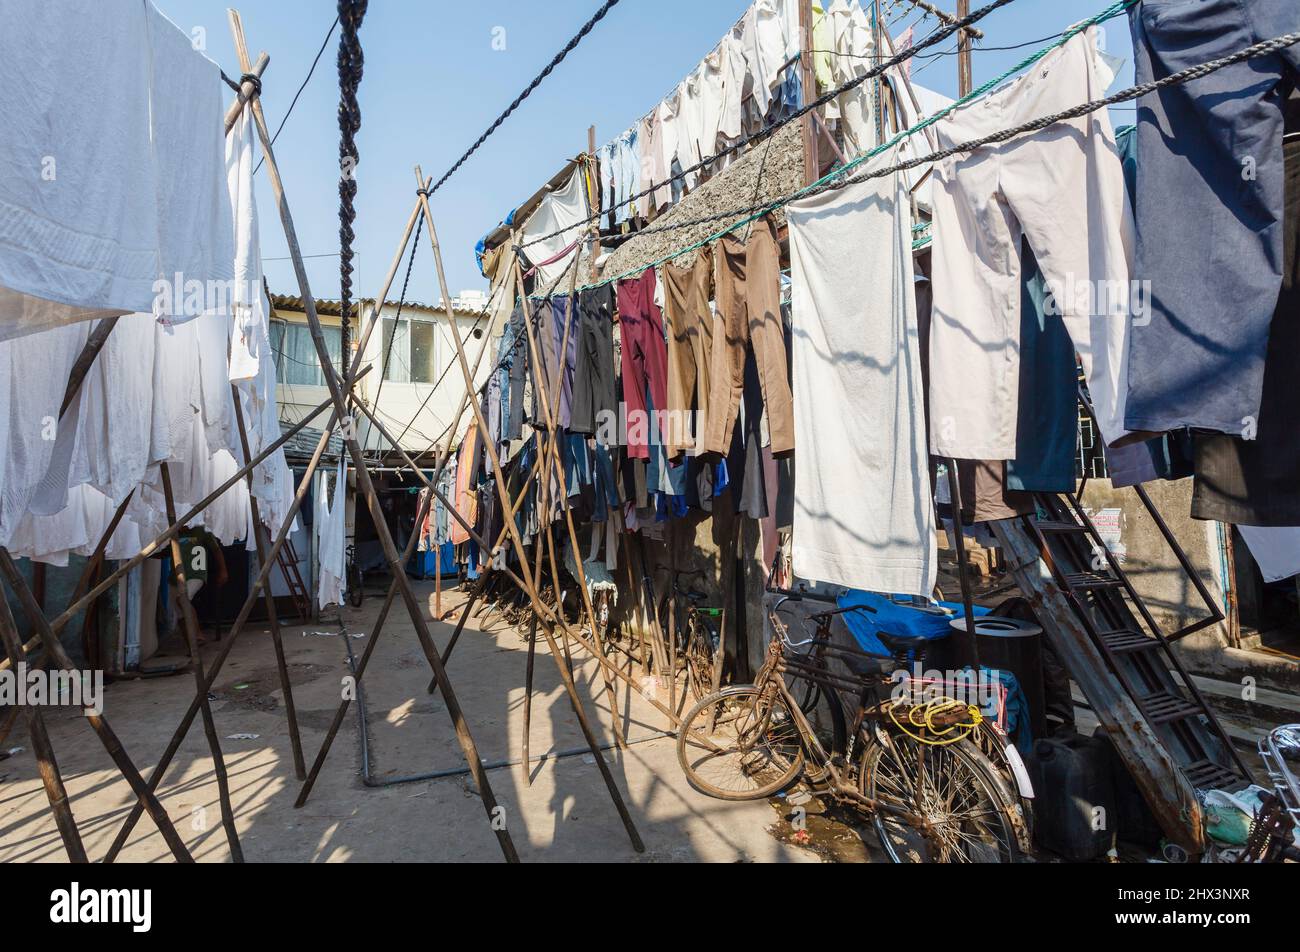 Freshly cleaned clothes and towels hanging out to dry, drying in the open air in Mahalaxmi Dhobi Ghat, a large open air laundromat in Mumbai, India Stock Photo